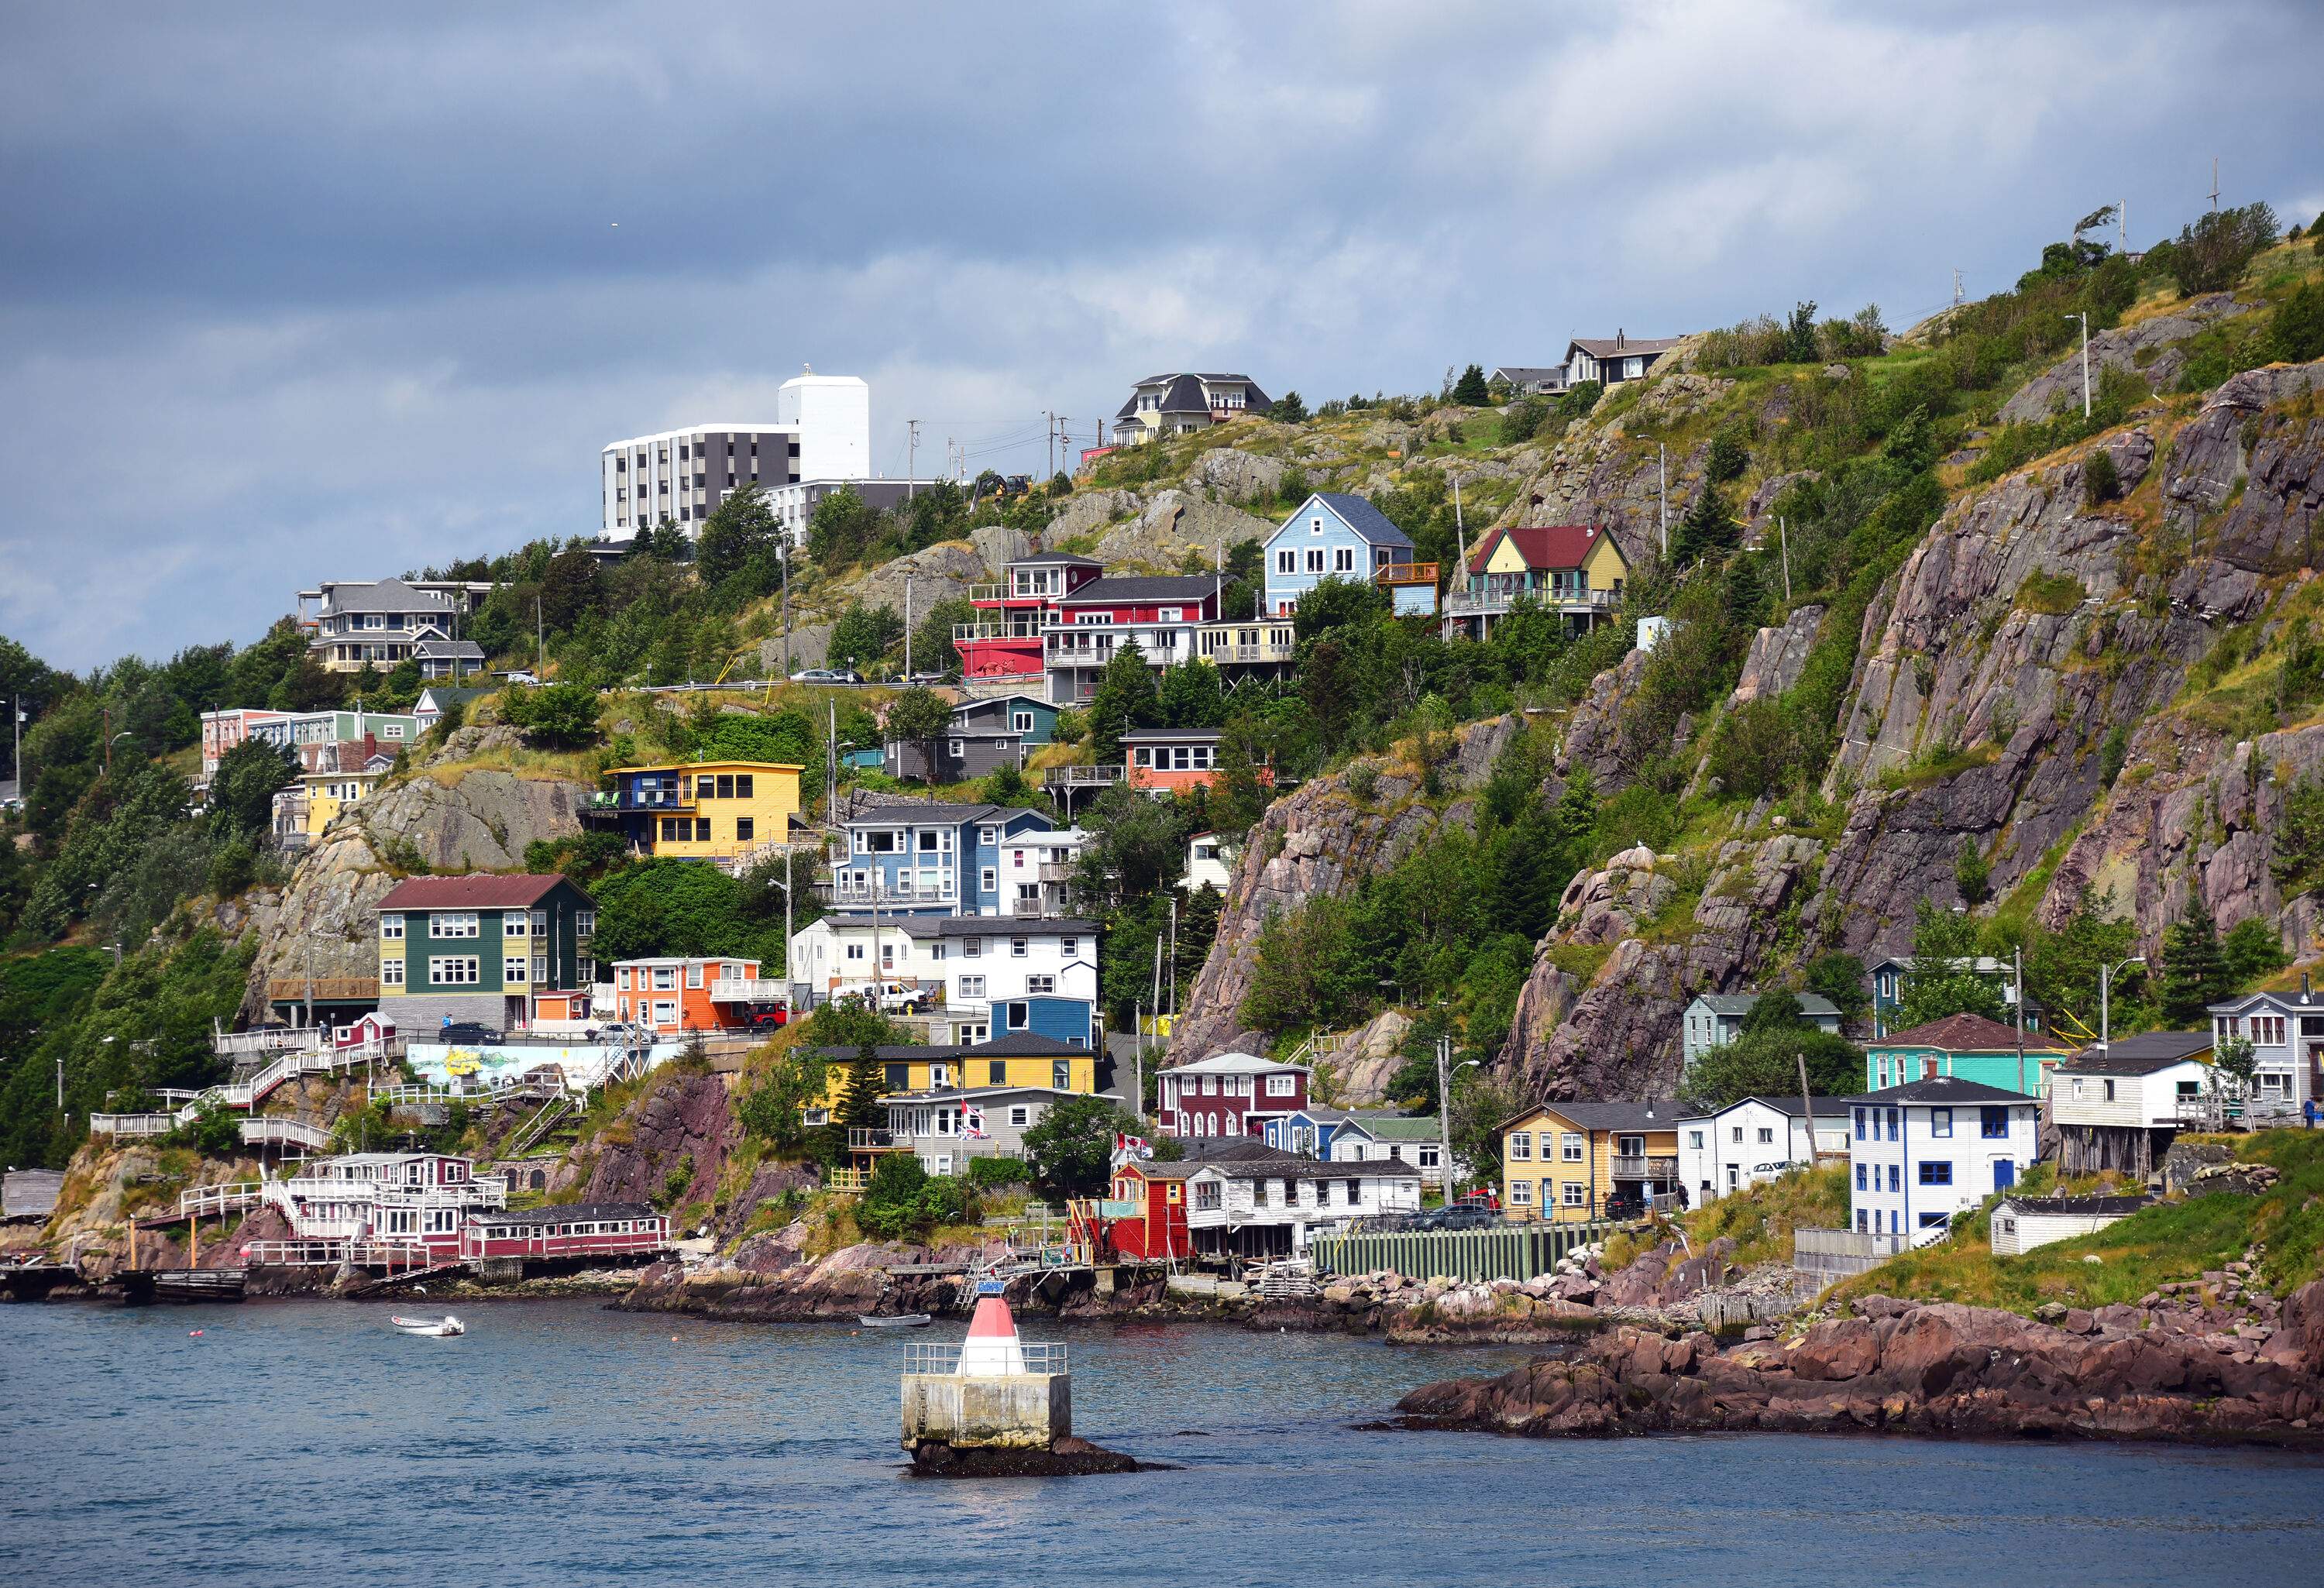 Vibrant and colourful houses cascade on rugged slopes adorned with lush vegetation, nestled by the picturesque coast.